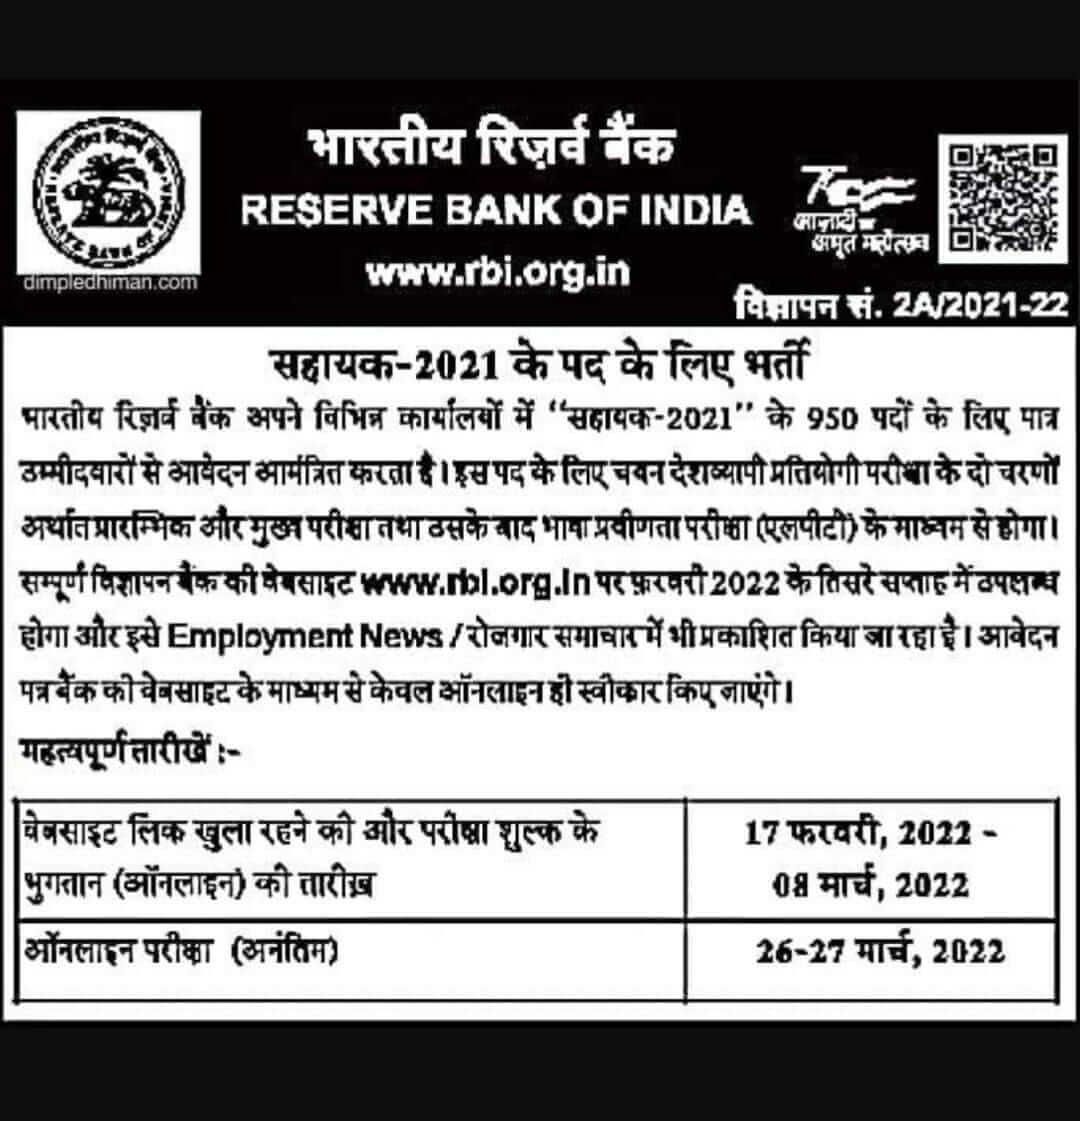 RBI Assistant 2022 Notification Out for 950 Vacancies, Exam Date_80.1